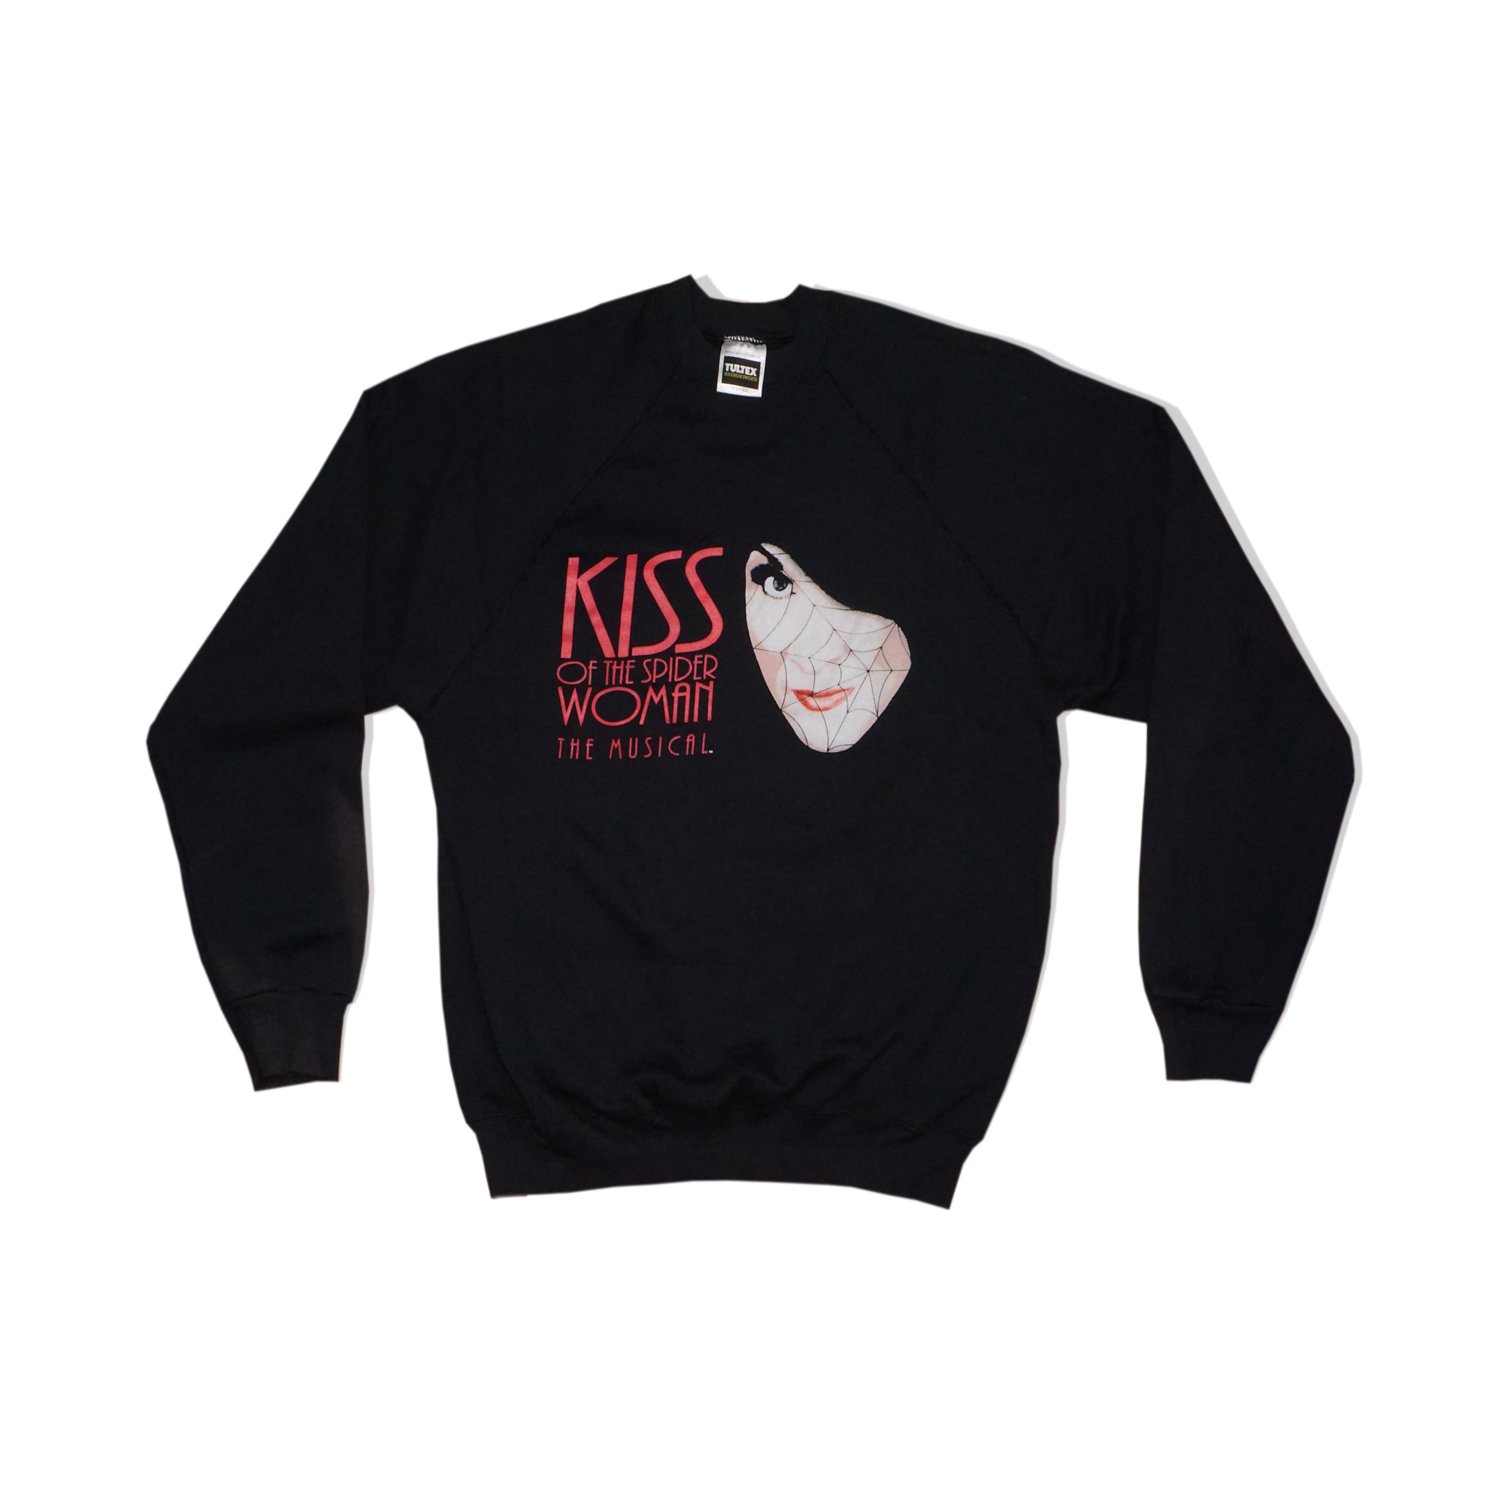 Vintage Kiss of the Spider Woman Crewneck